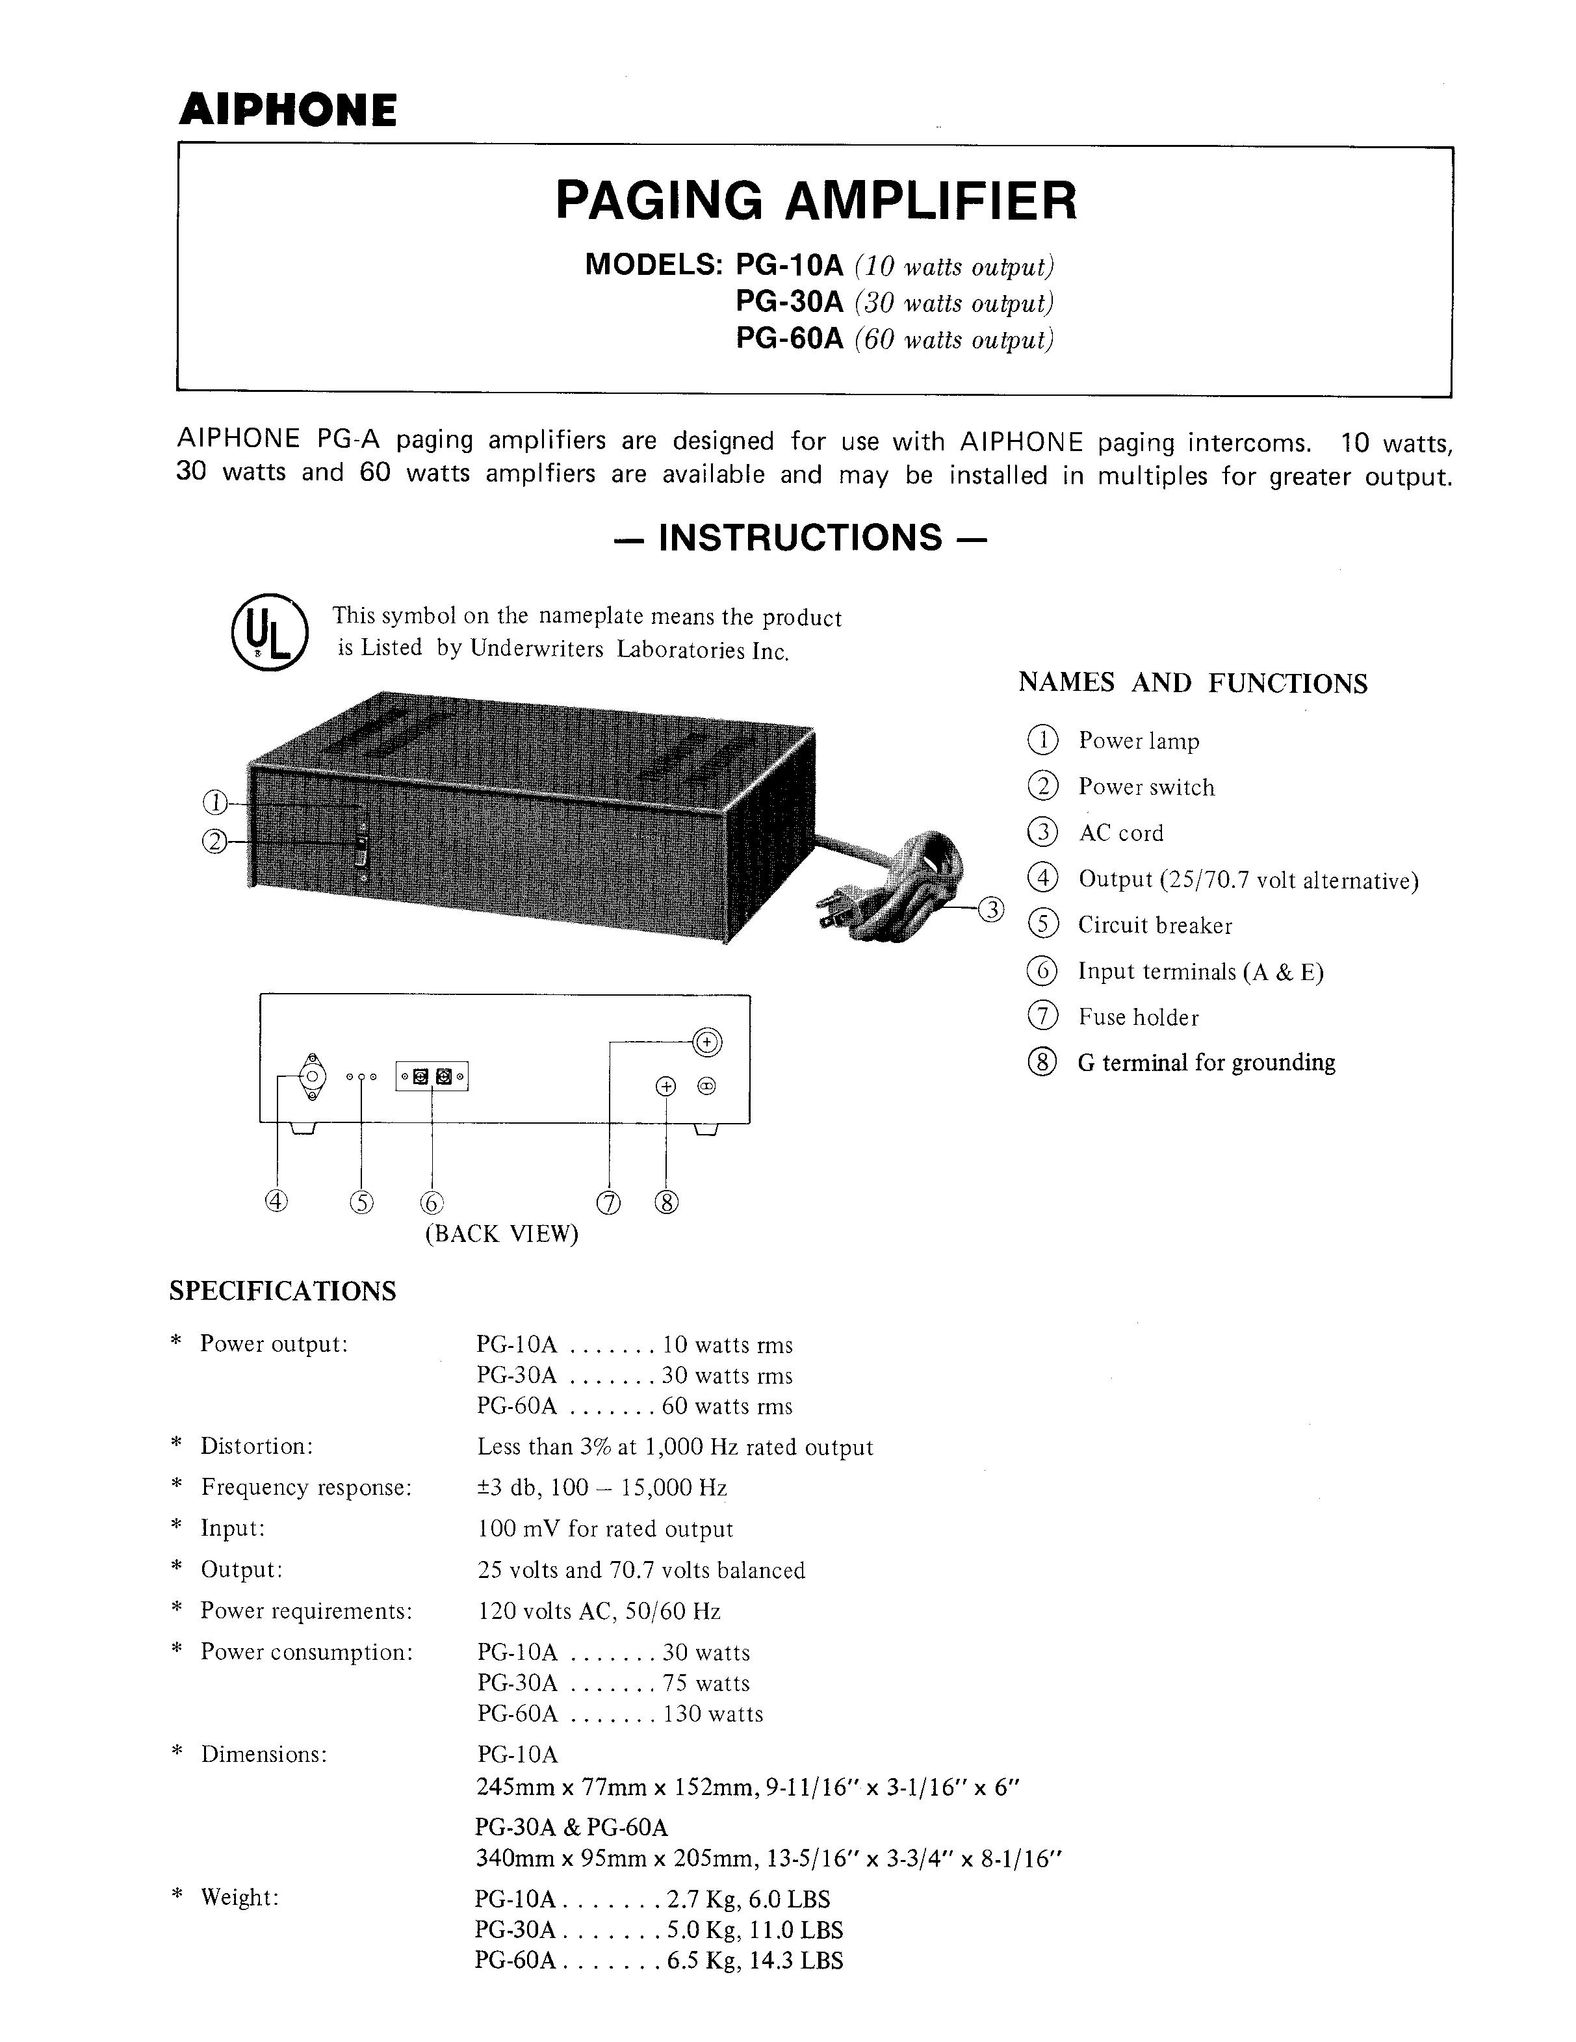 Aiphone PG-10A Amplified Phone User Manual (Page 1)